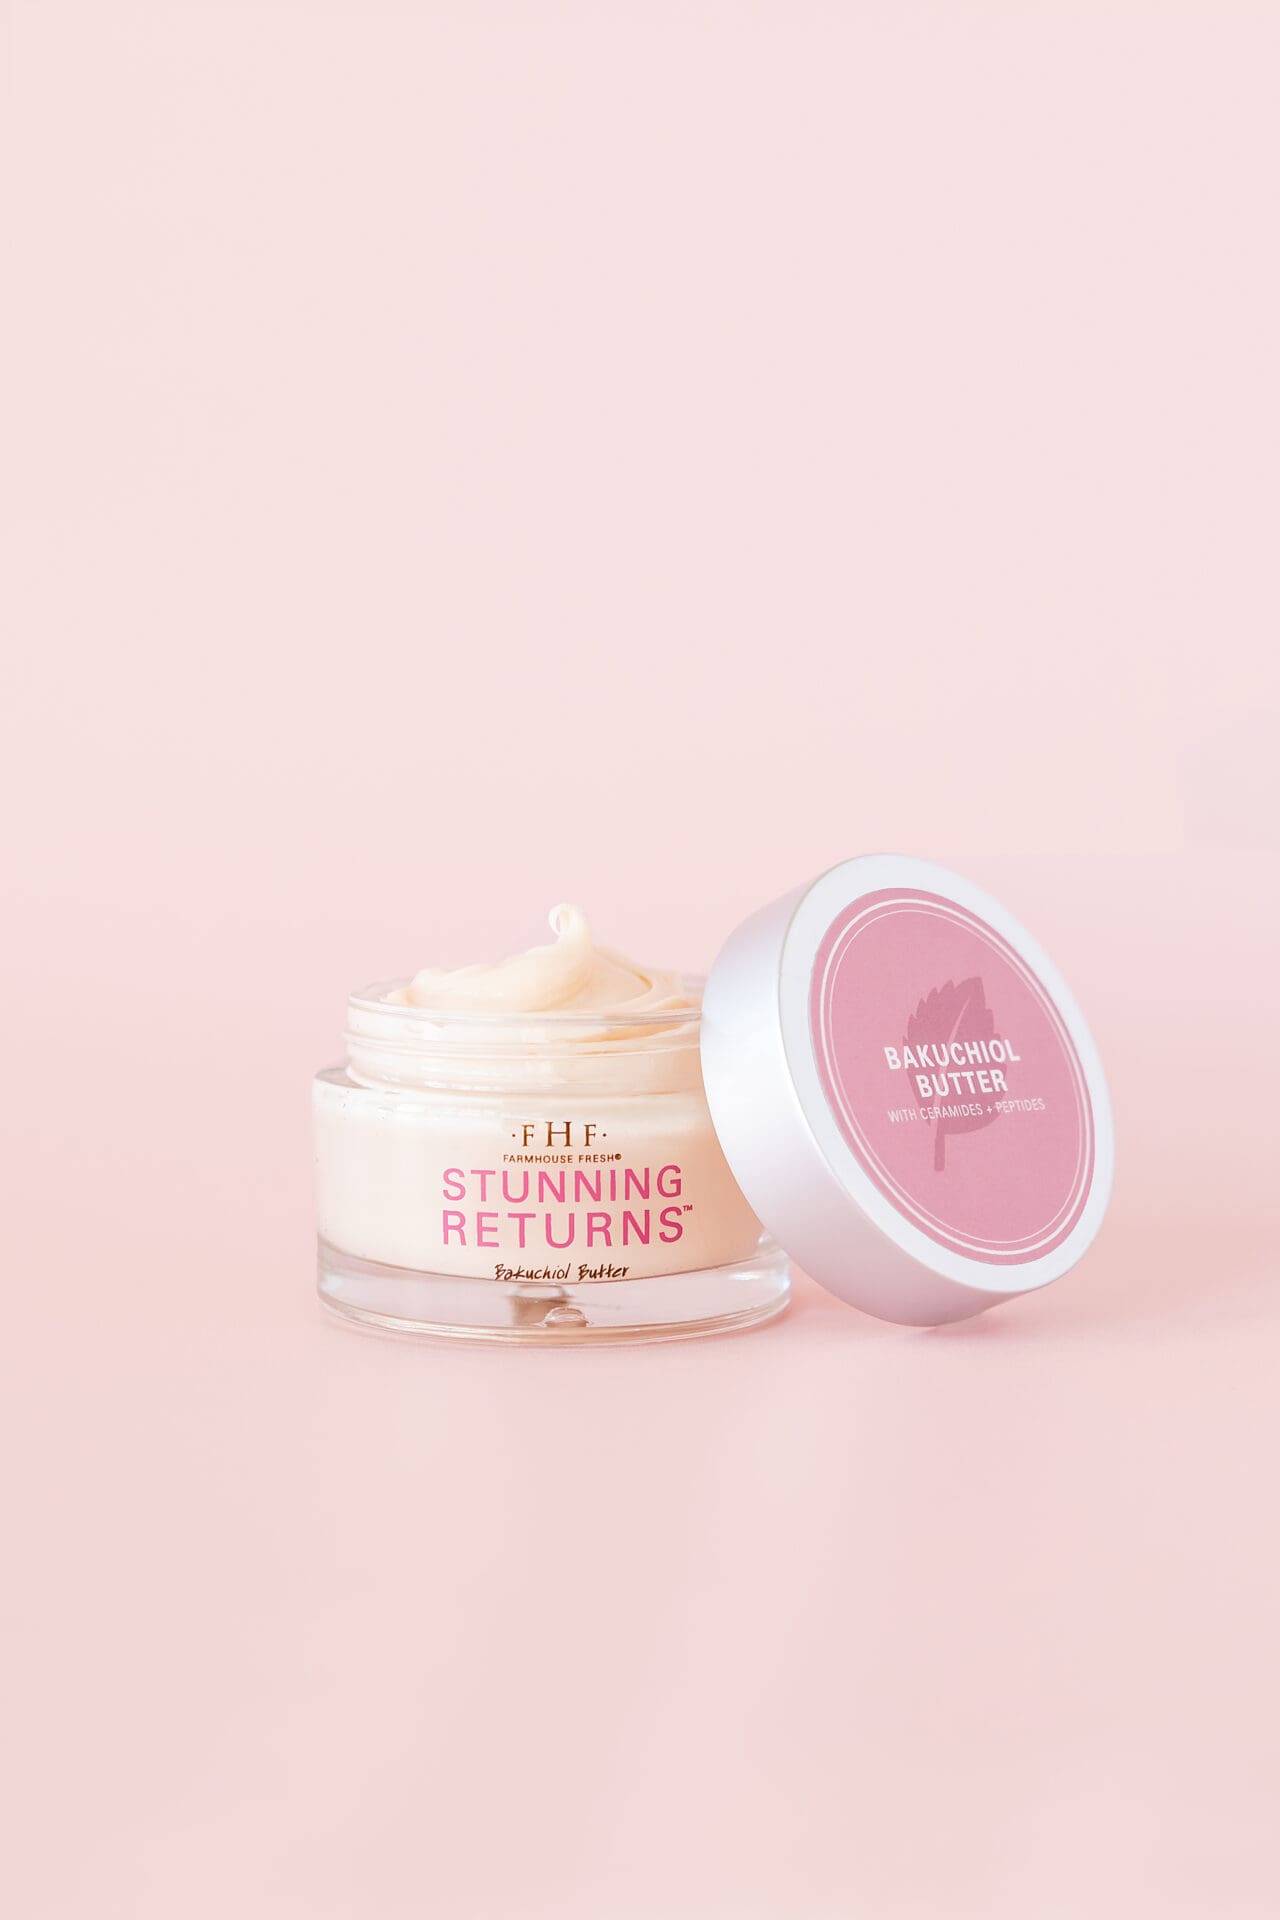 A pink and white container of cream sitting next to another container.